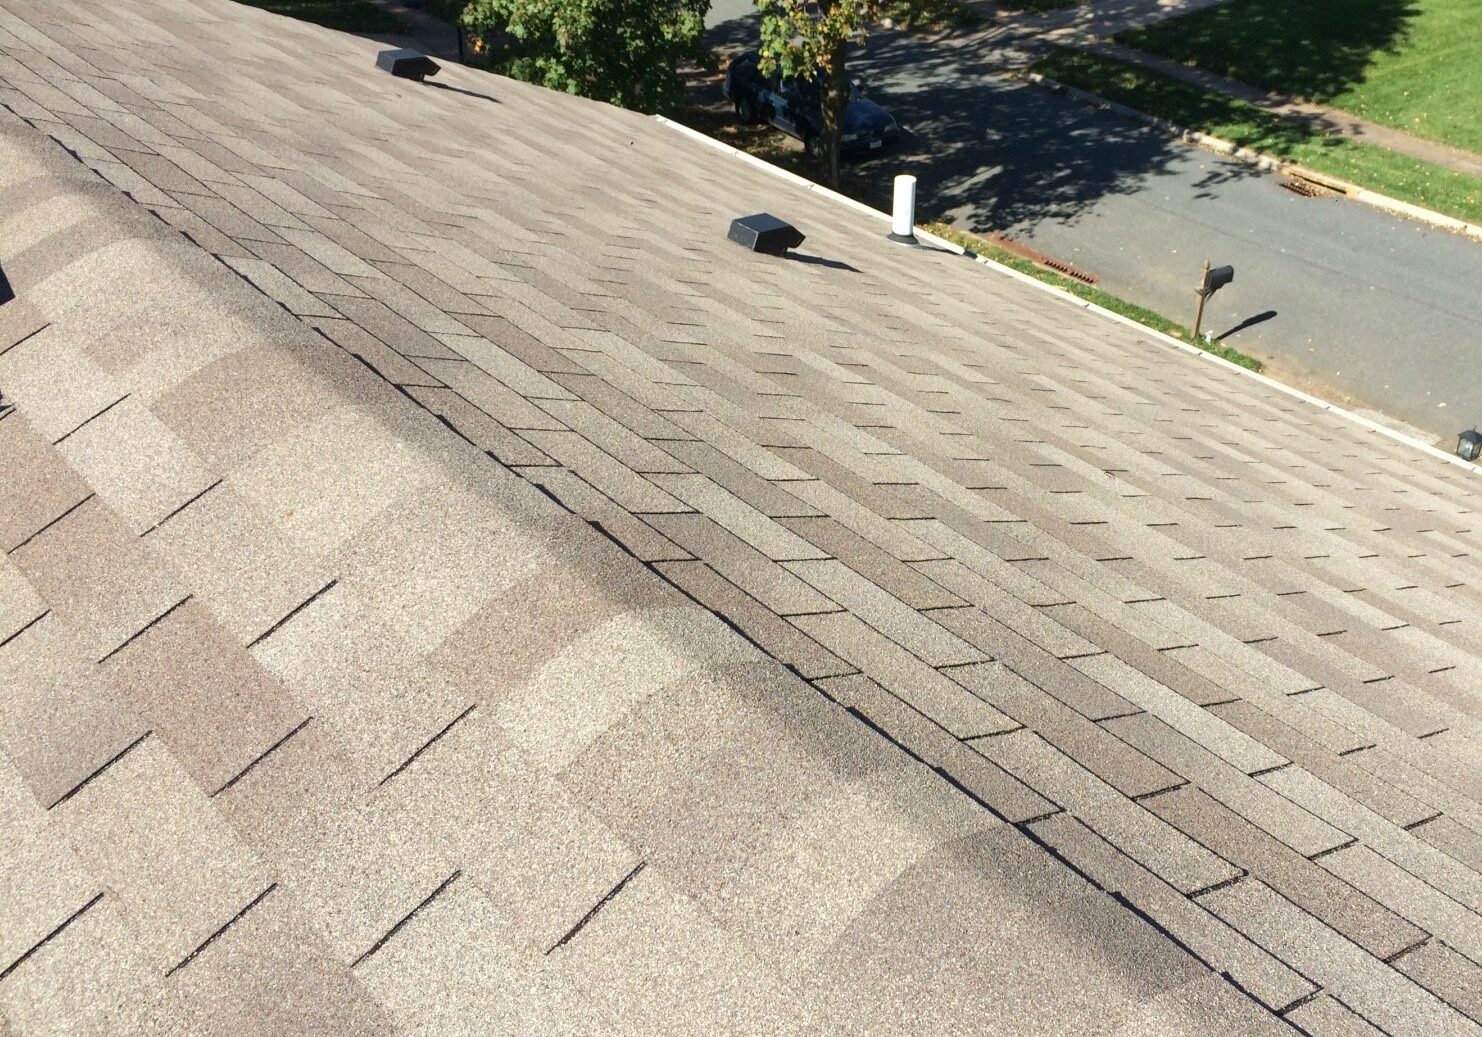 TSW Roofing Solutions